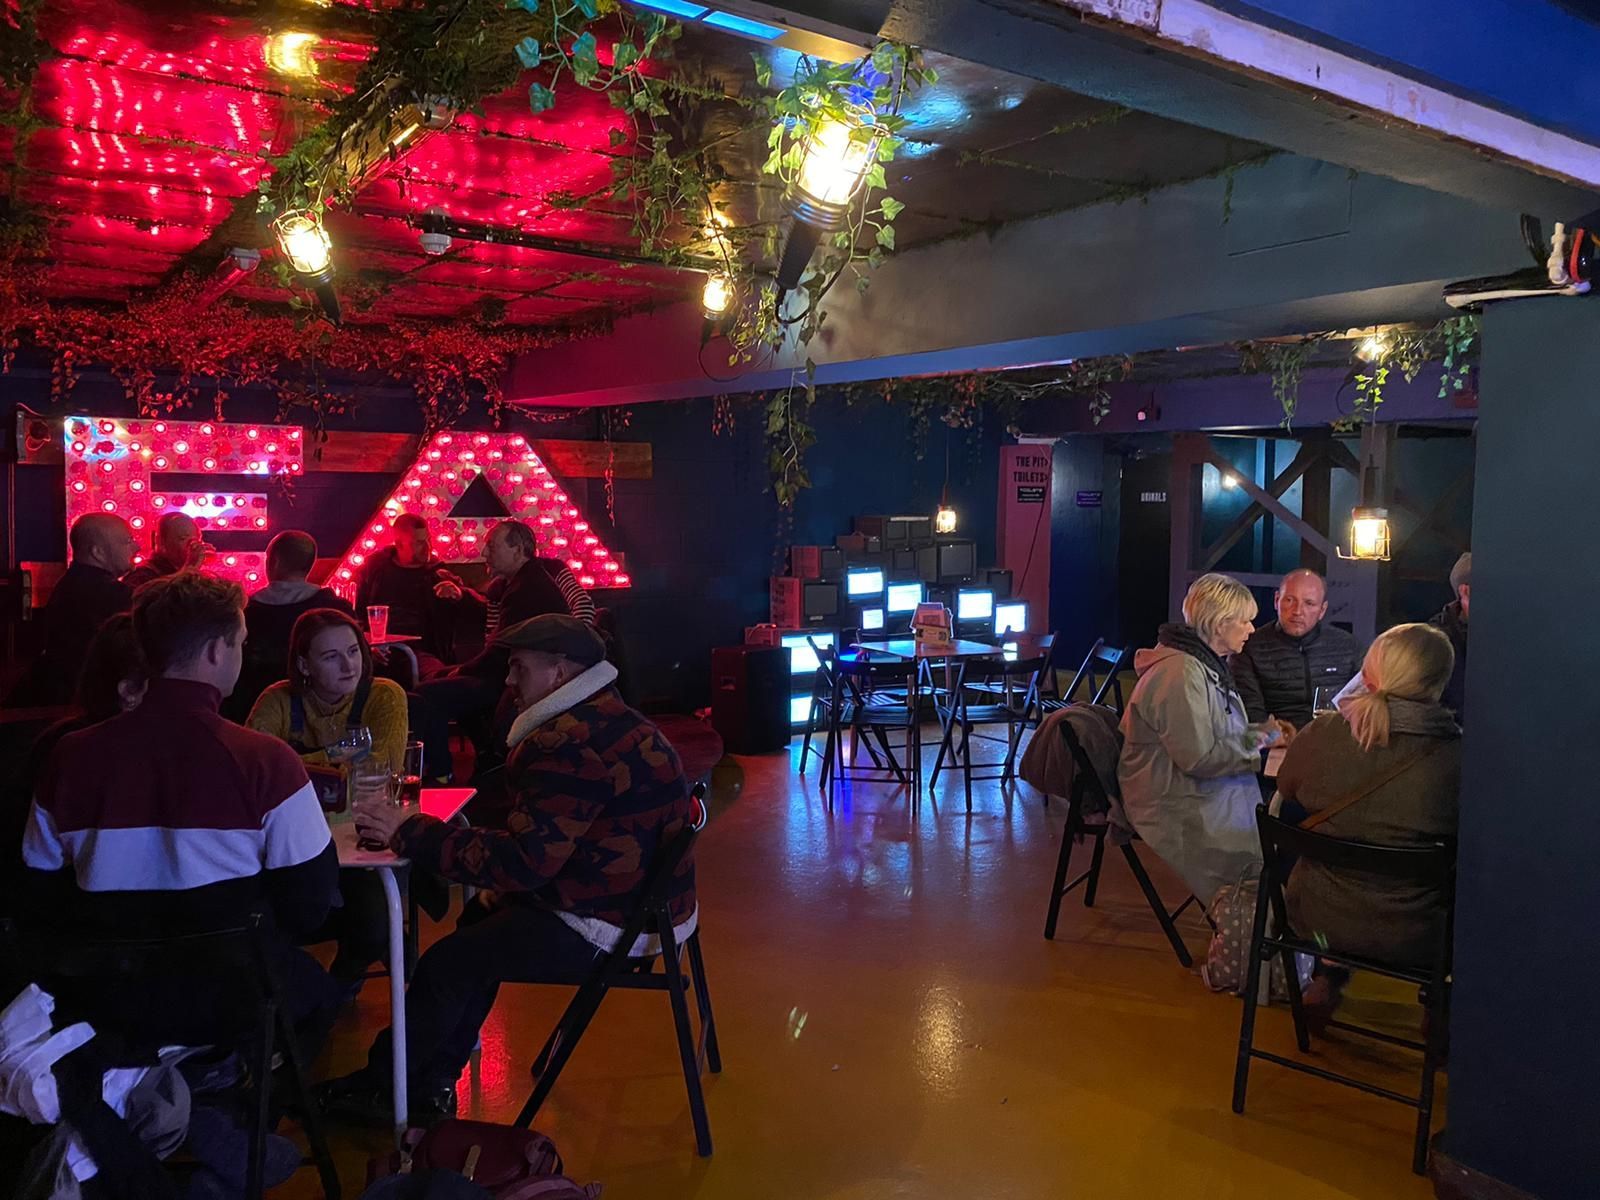 Underground arts venue Electric Arcade has opened on Brighton seafront, and hopes to offer high-quality live performances to visitors 